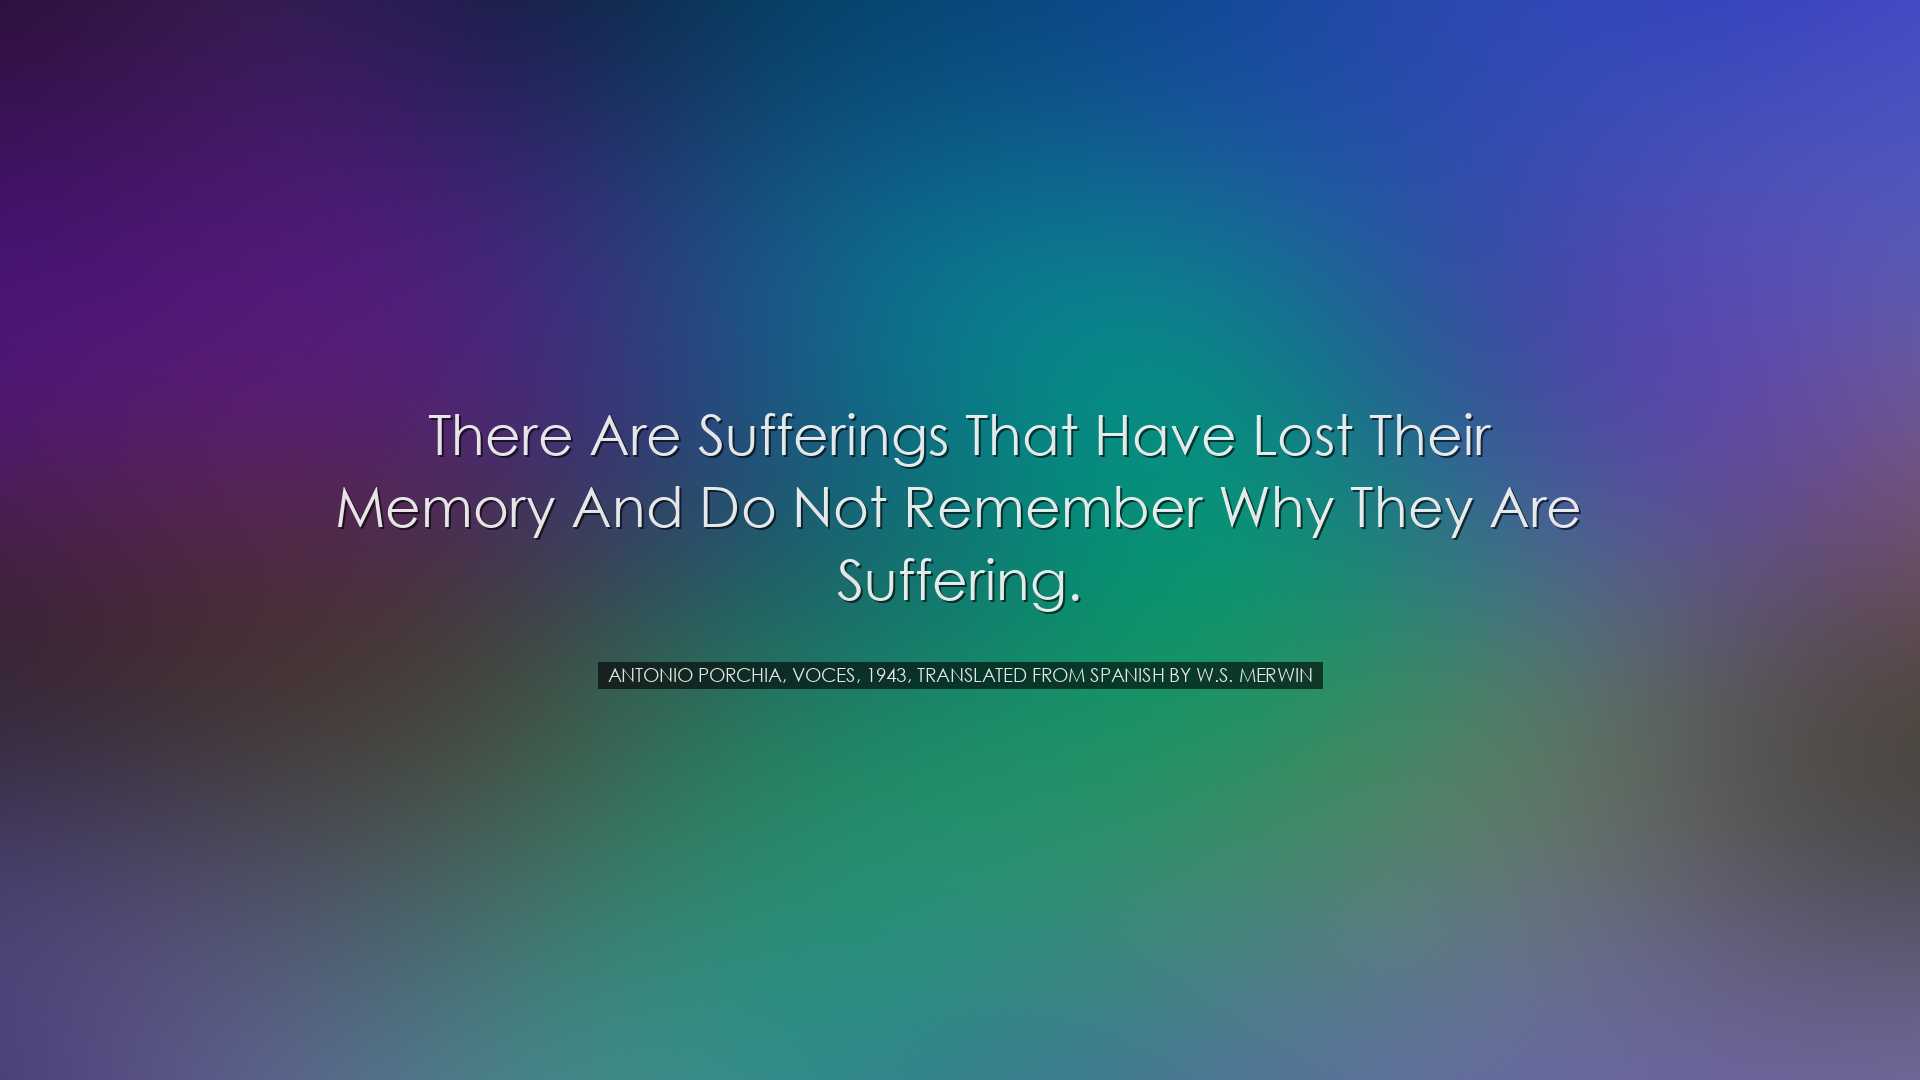 There are sufferings that have lost their memory and do not rememb